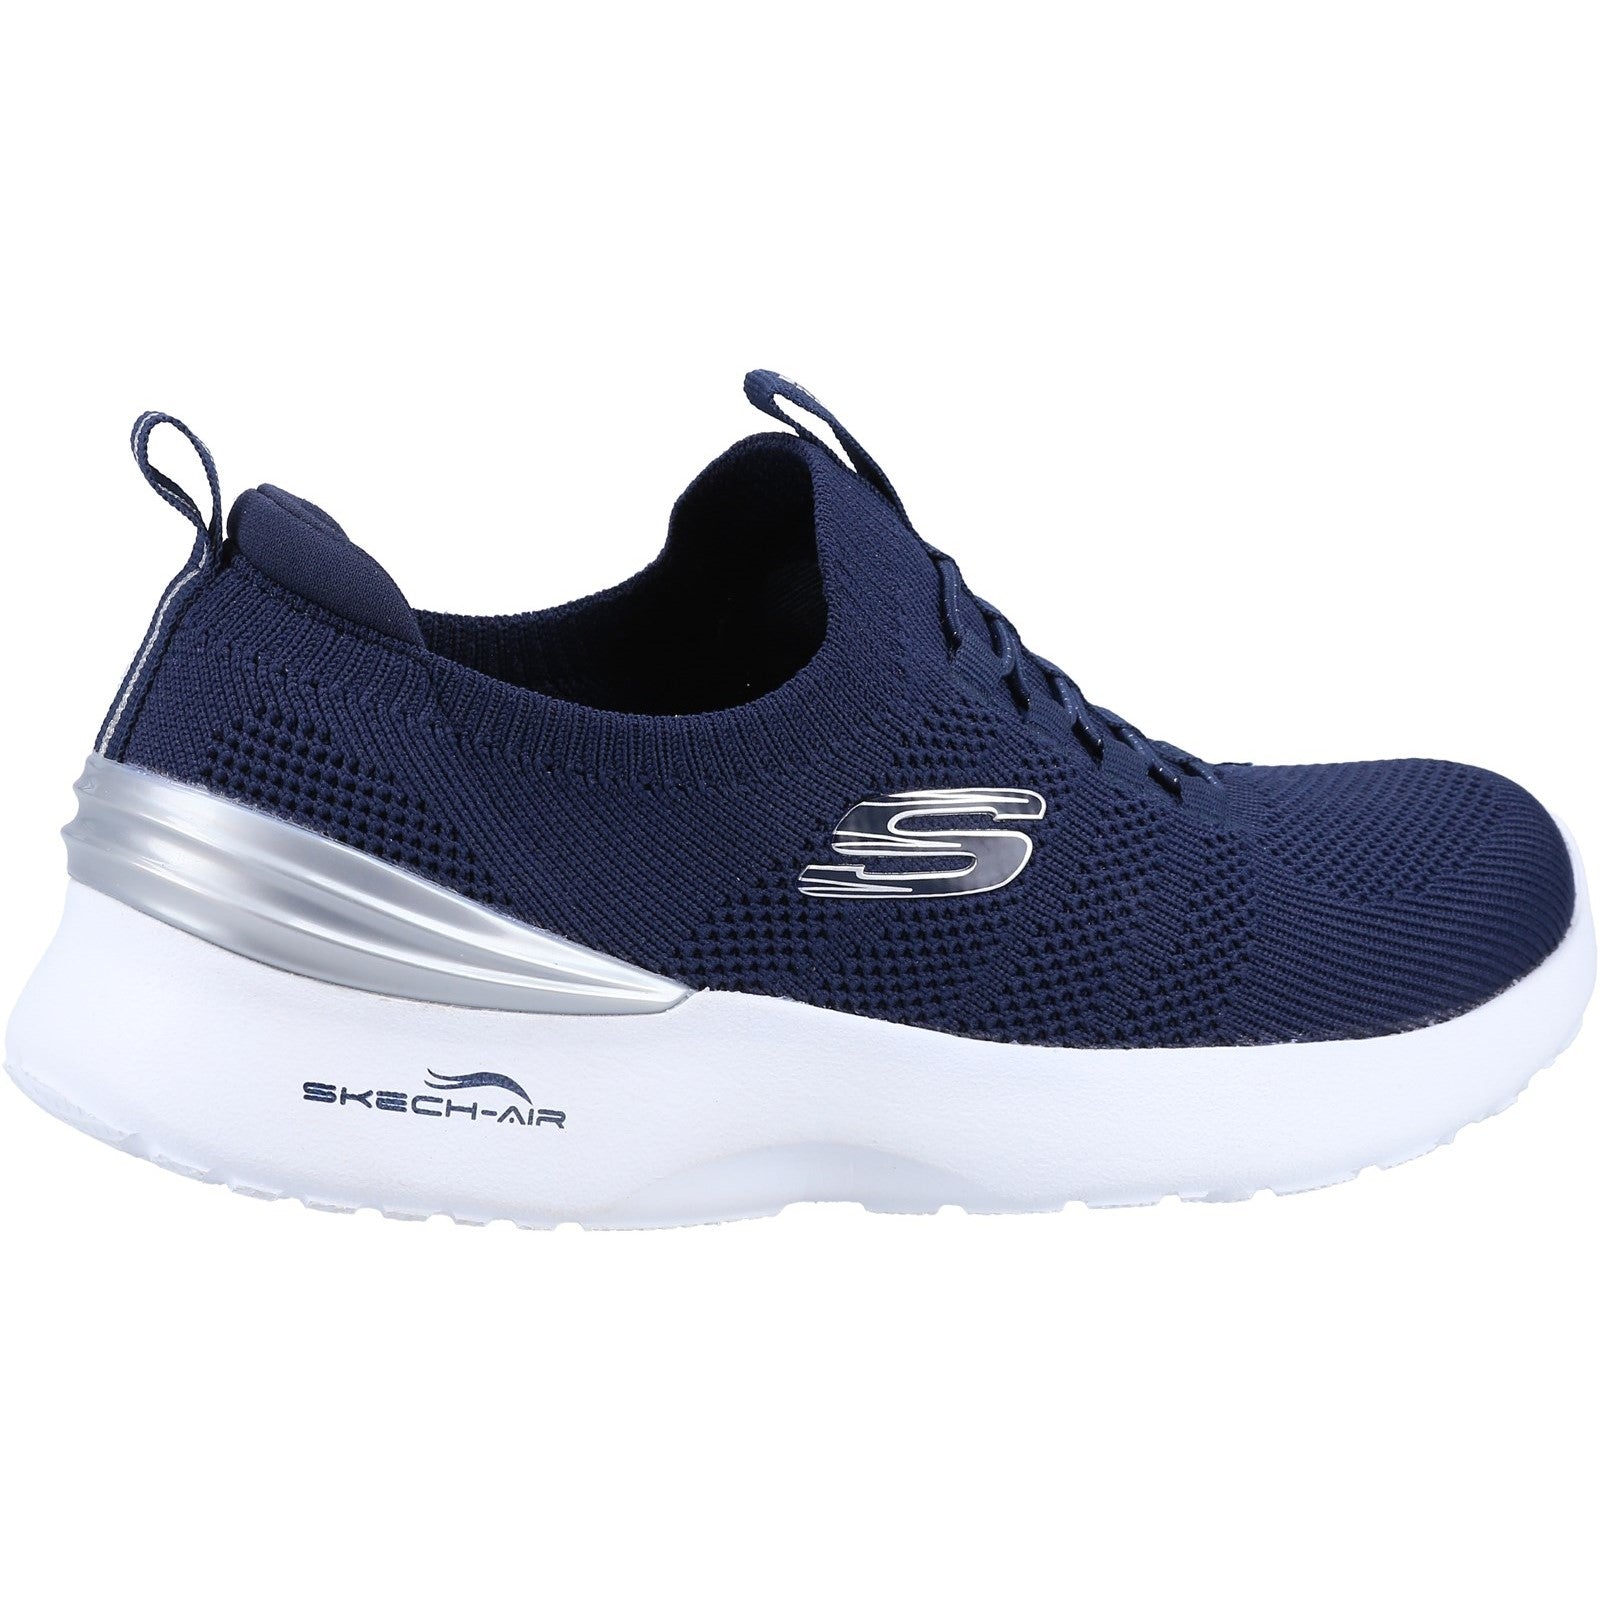 Skechers Womens Flex Appeal 4.0 Brilliant View Trainers - Navy